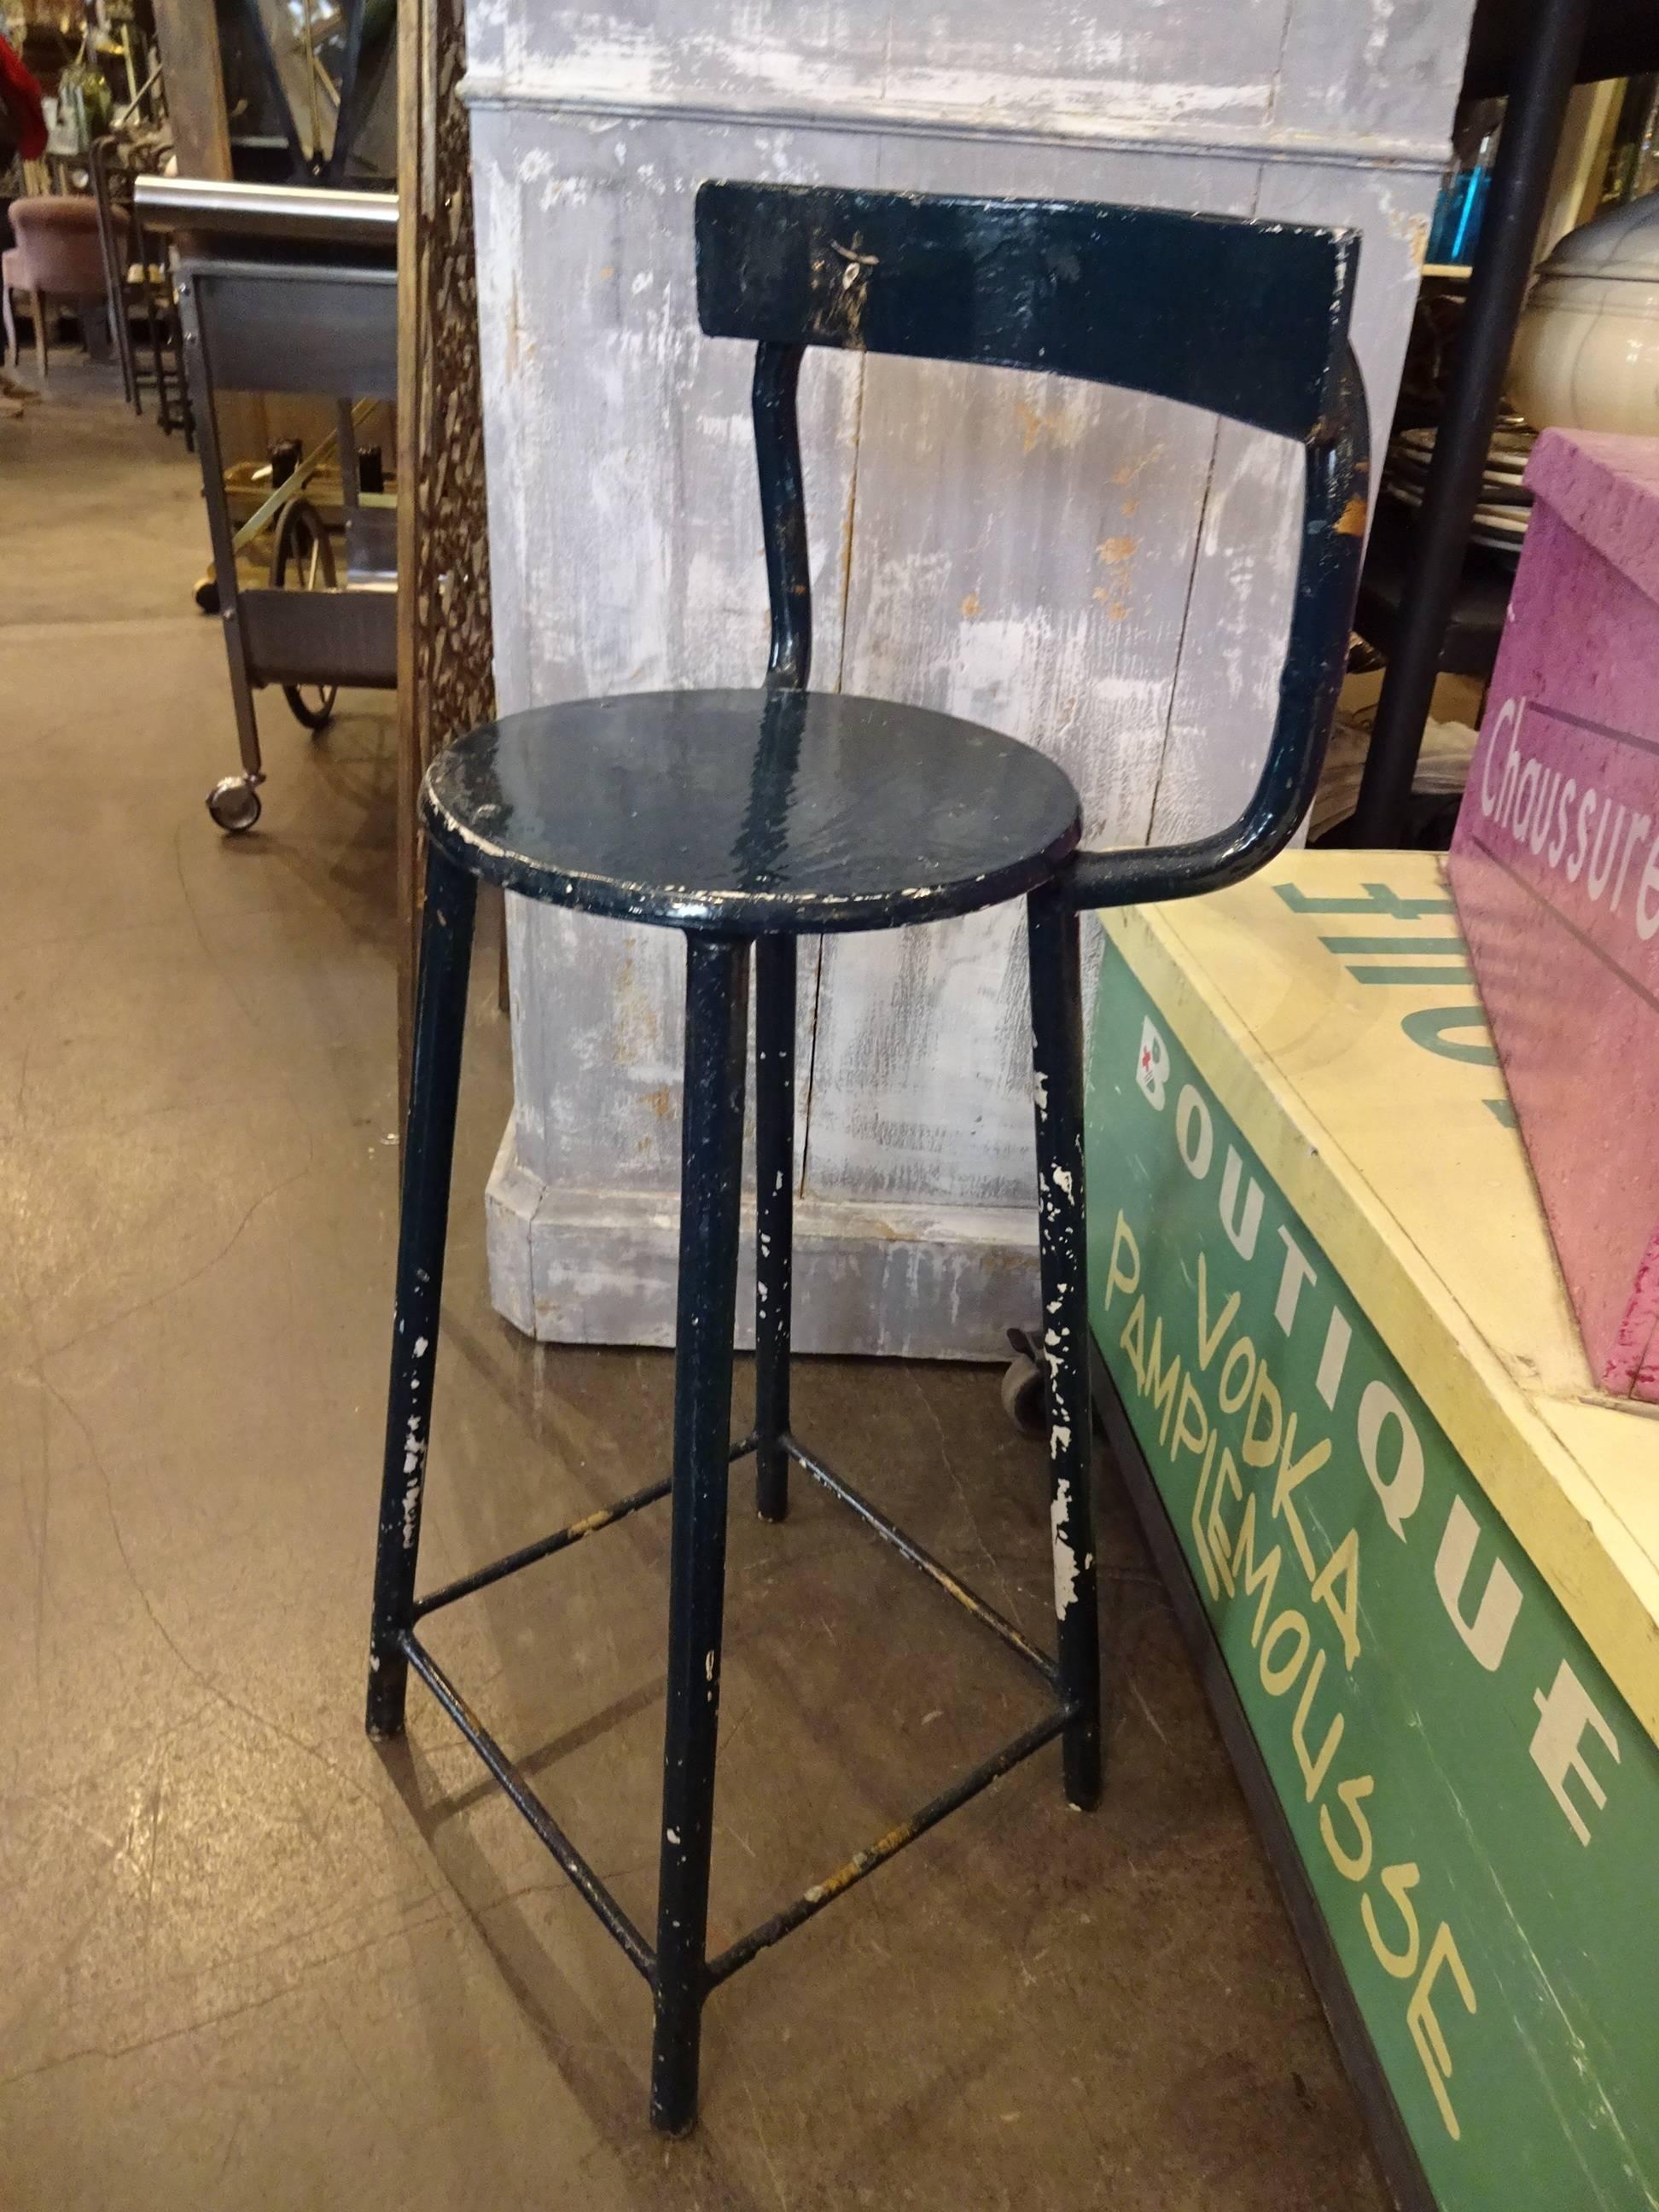 French chair from a workshop / blacksmith with a nice dark green high gloss paint.

 